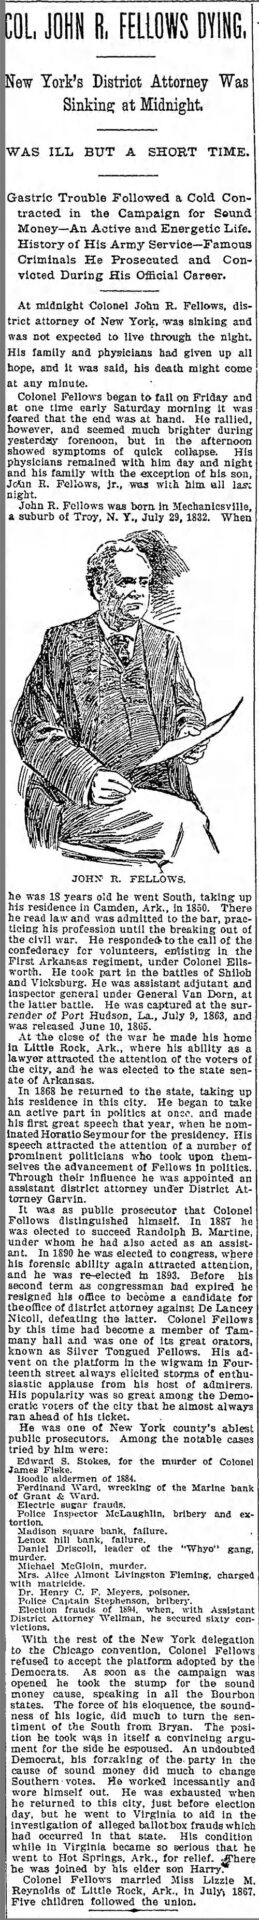 "Colonel John R. Fellows Dying" newspaper clipping